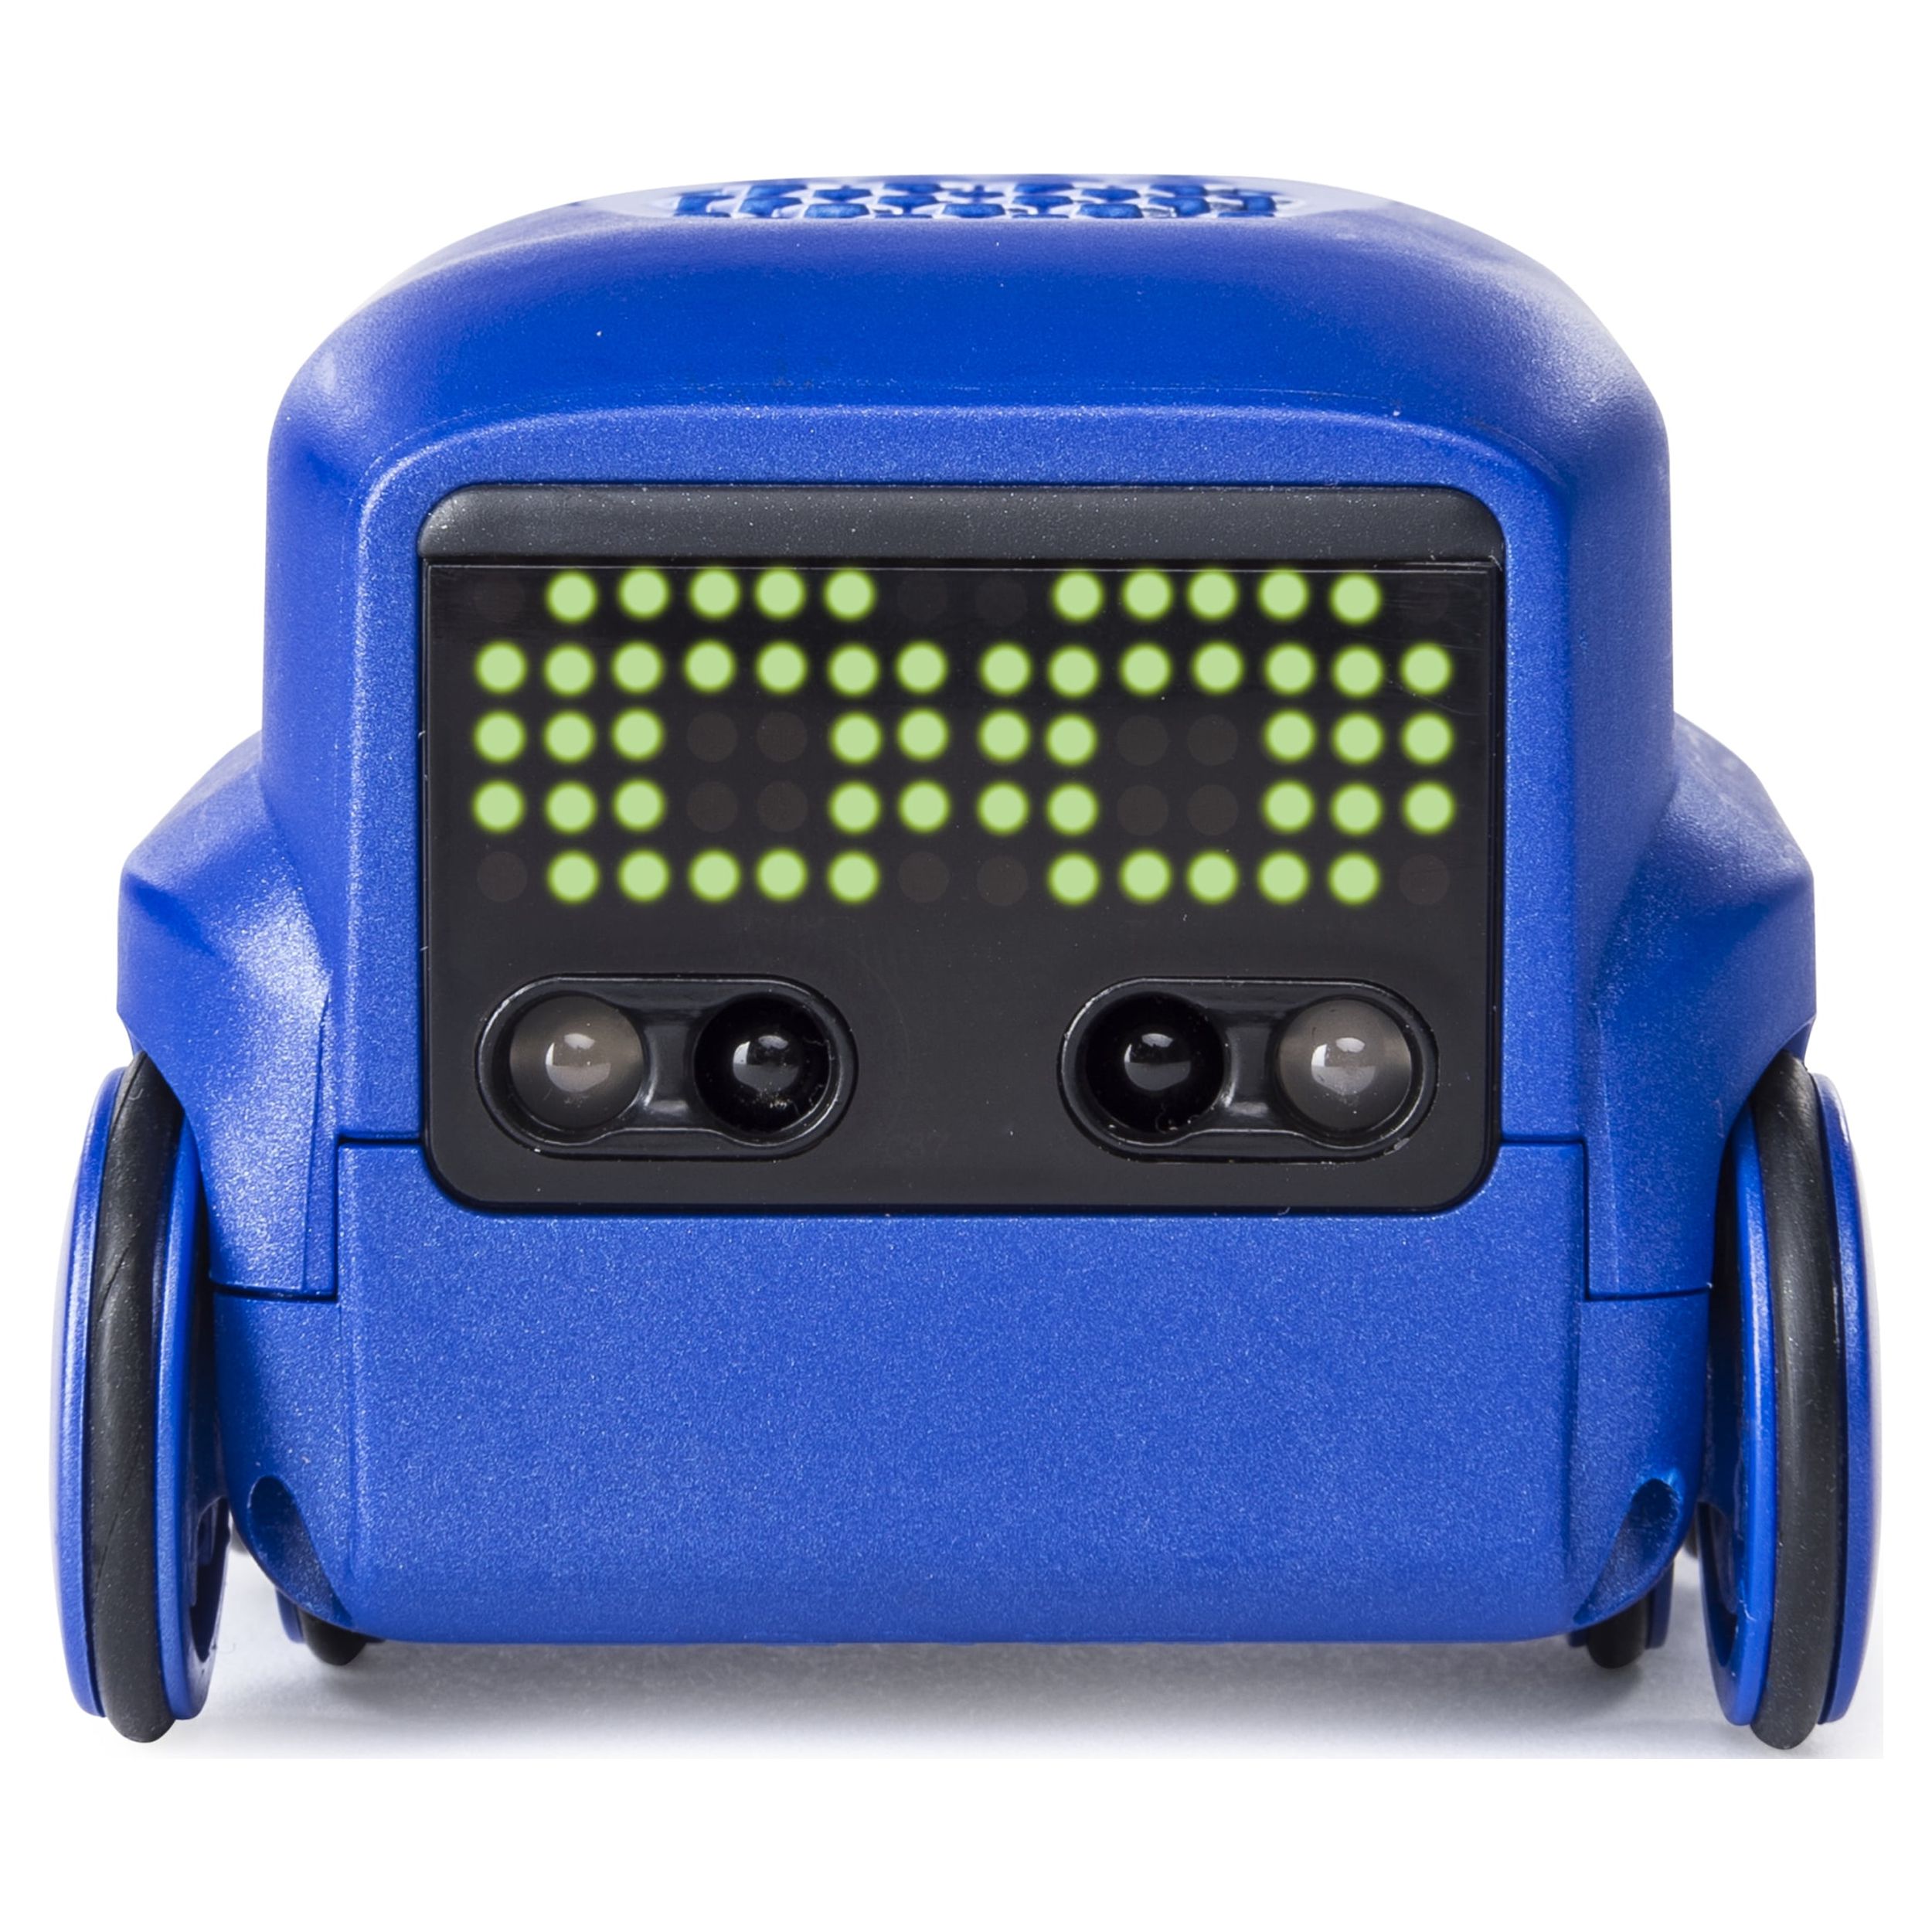 Boxer - Interactive A.I. Robot Toy (Blue) with Personality and Emotions, for Ages 6 and up - image 1 of 14